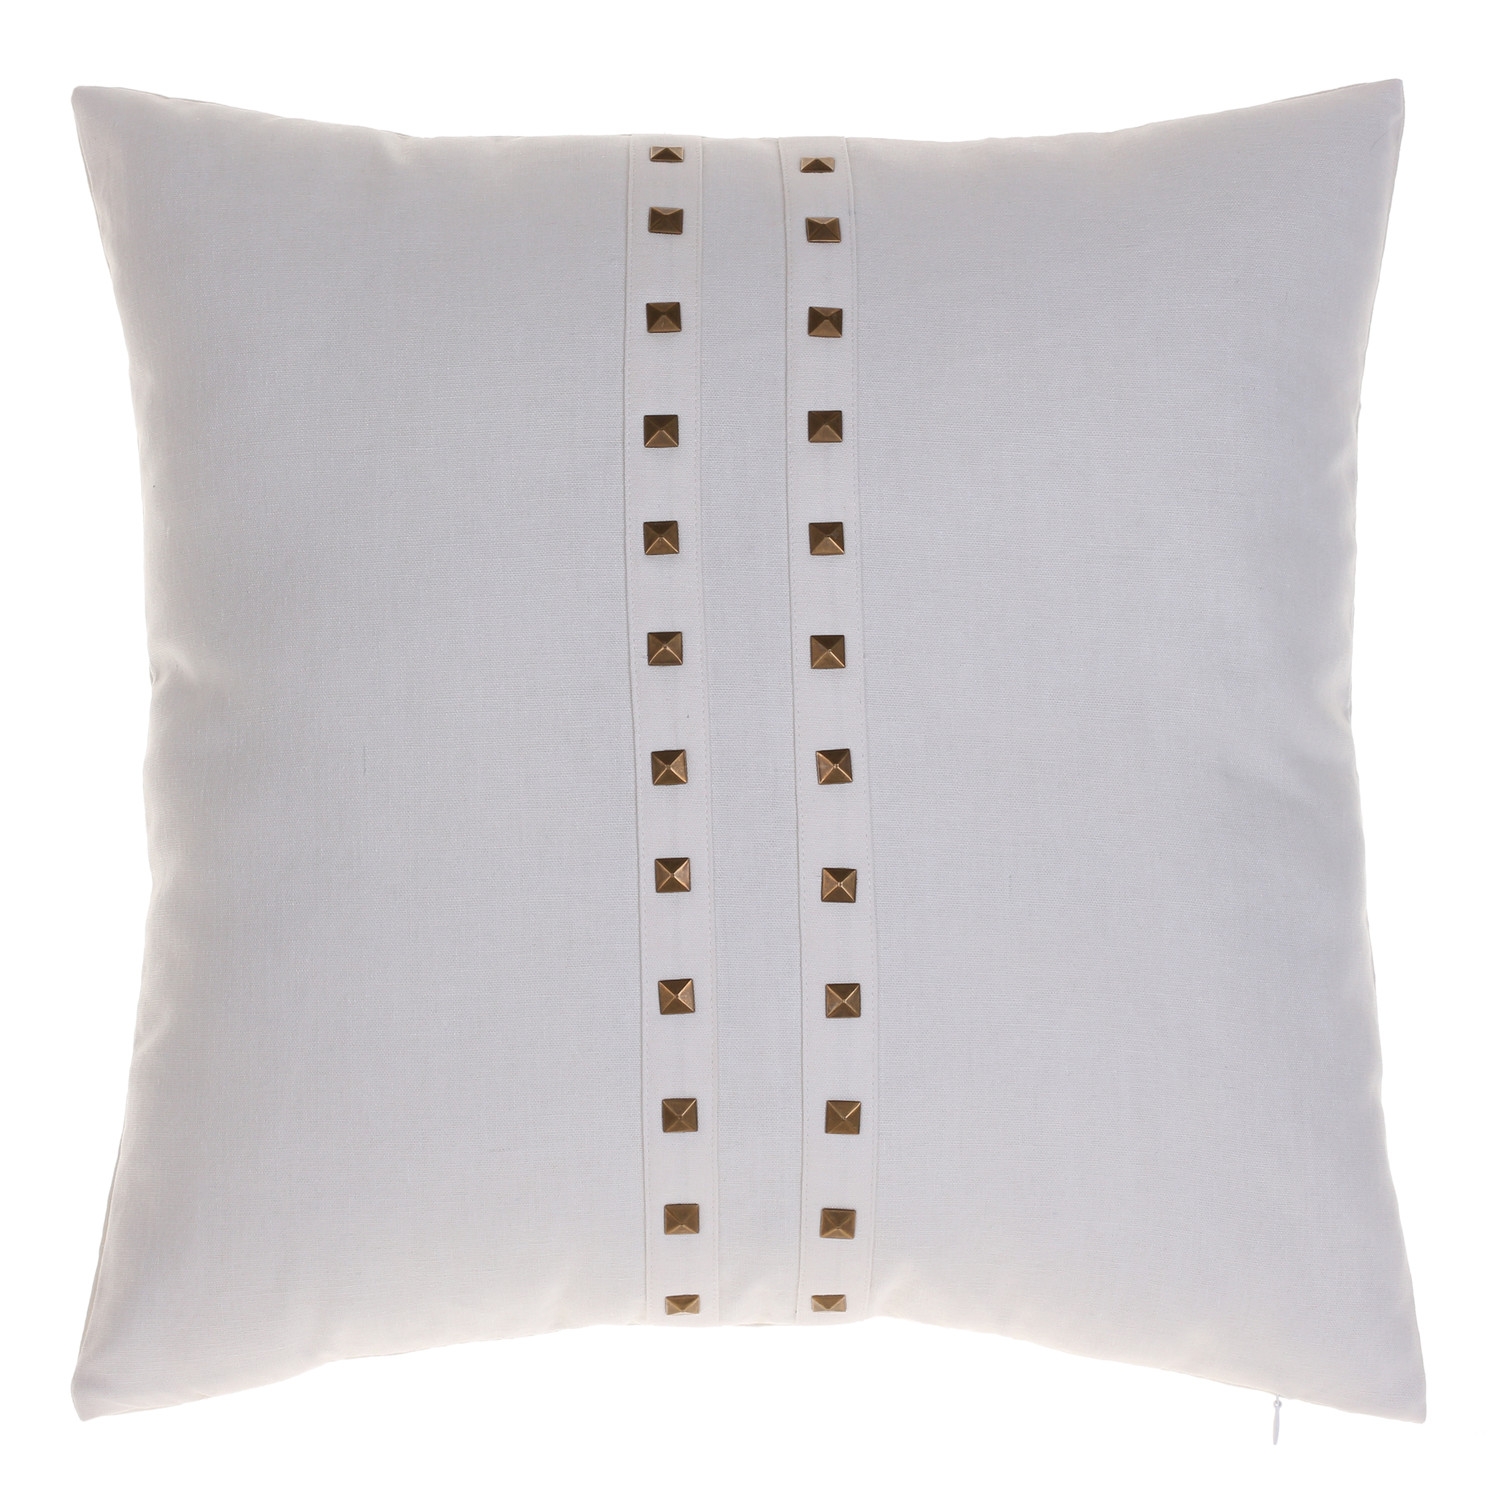 Jessa Throw Pillow - 20"x20" - Cotton -insert included - Image 0